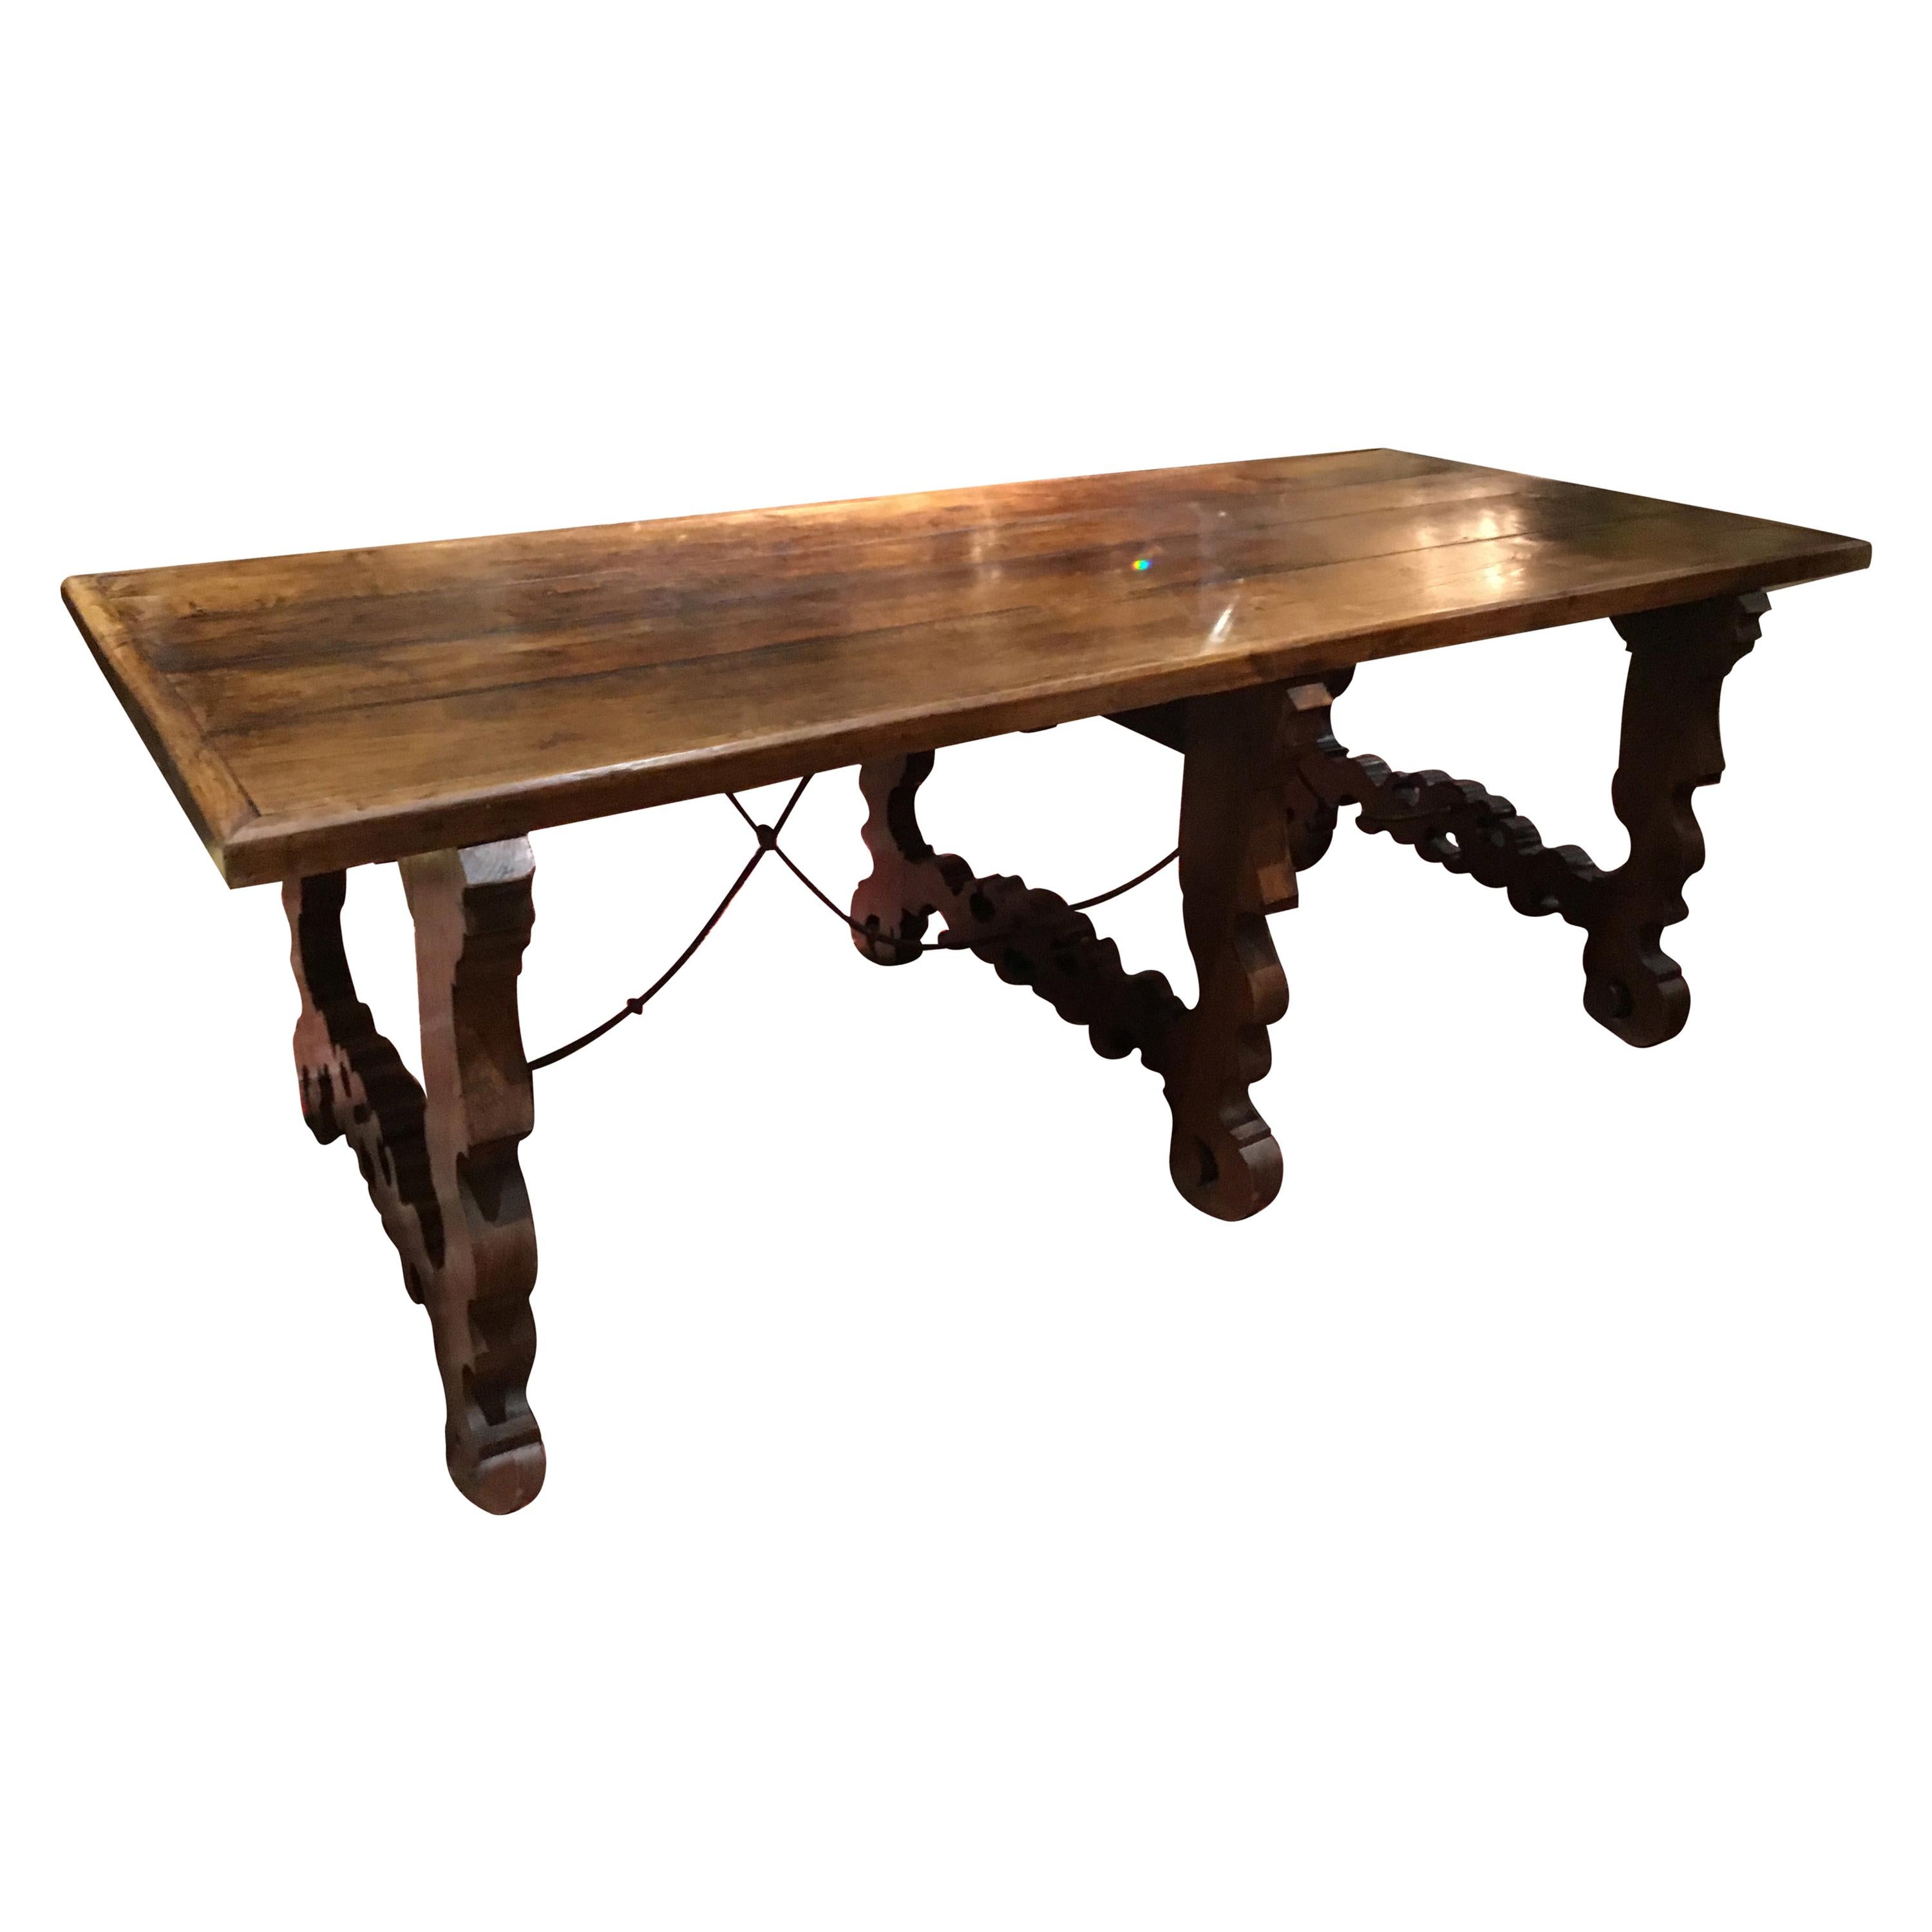 What is a farmhouse table?